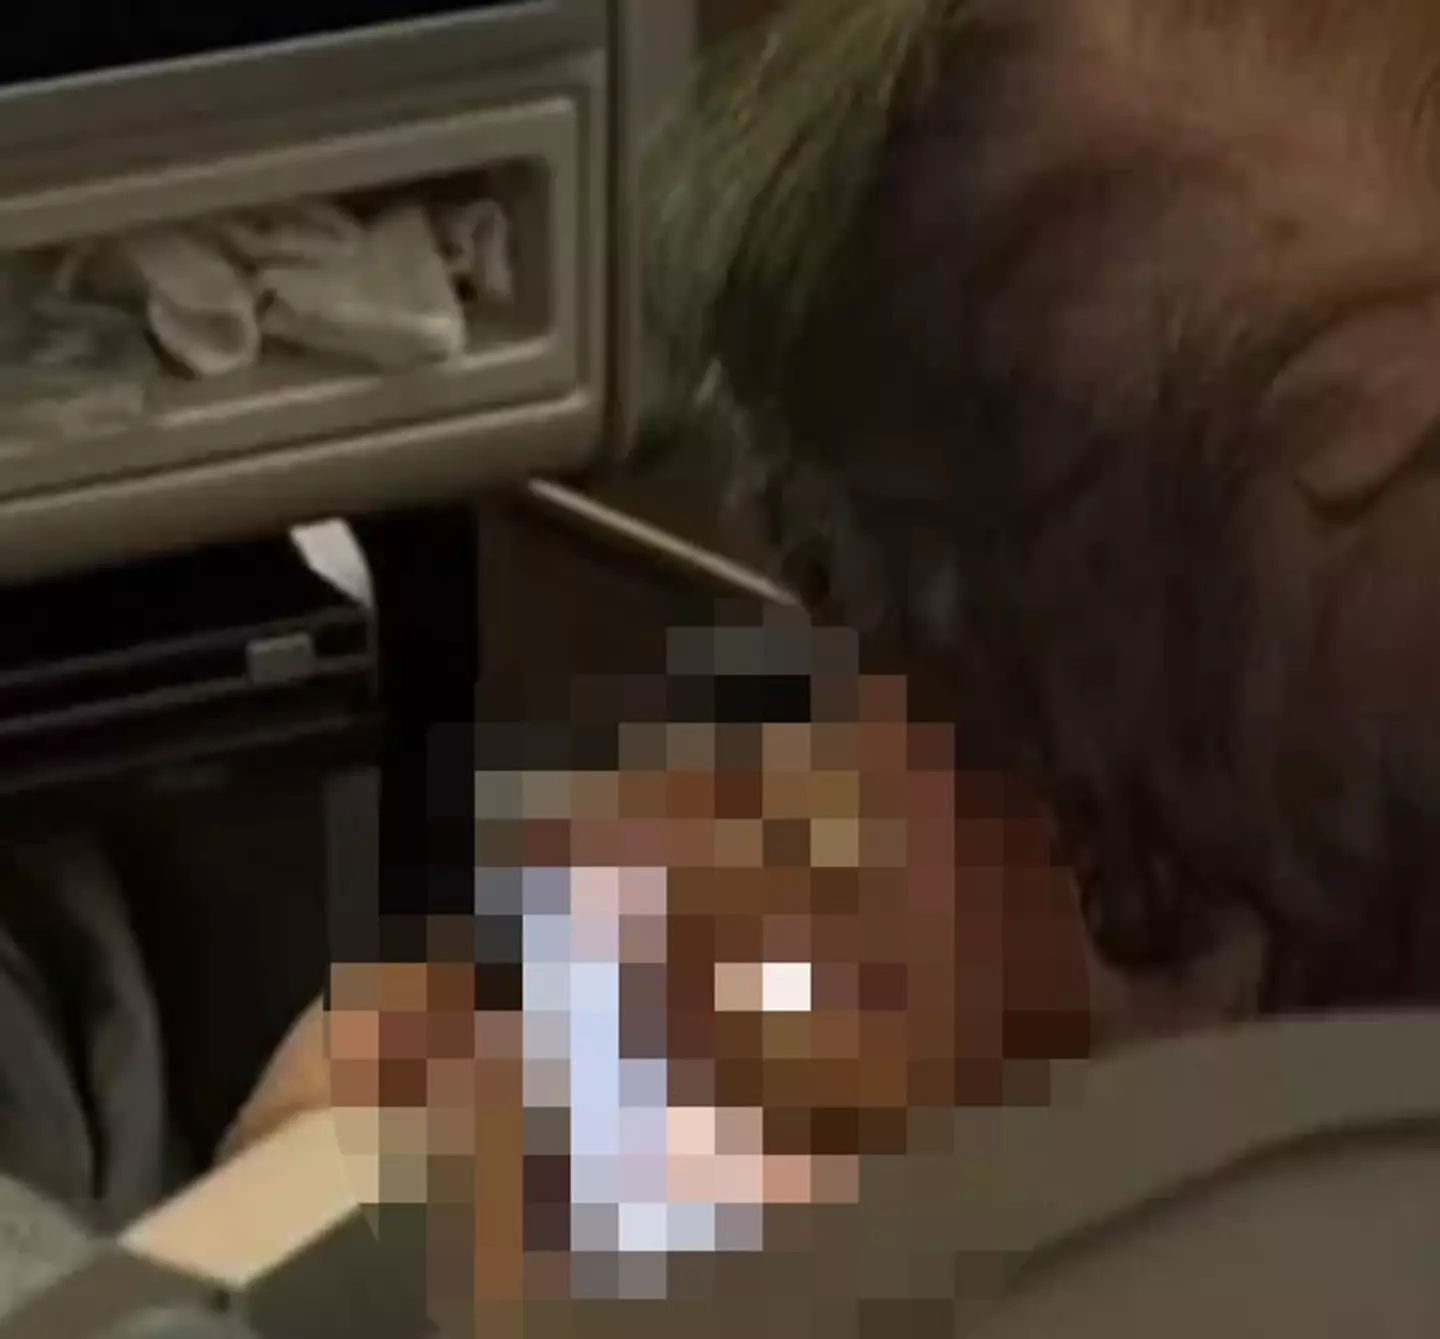 A plane passenger was horrified to discover a man on the flight was watching hardcore porn.